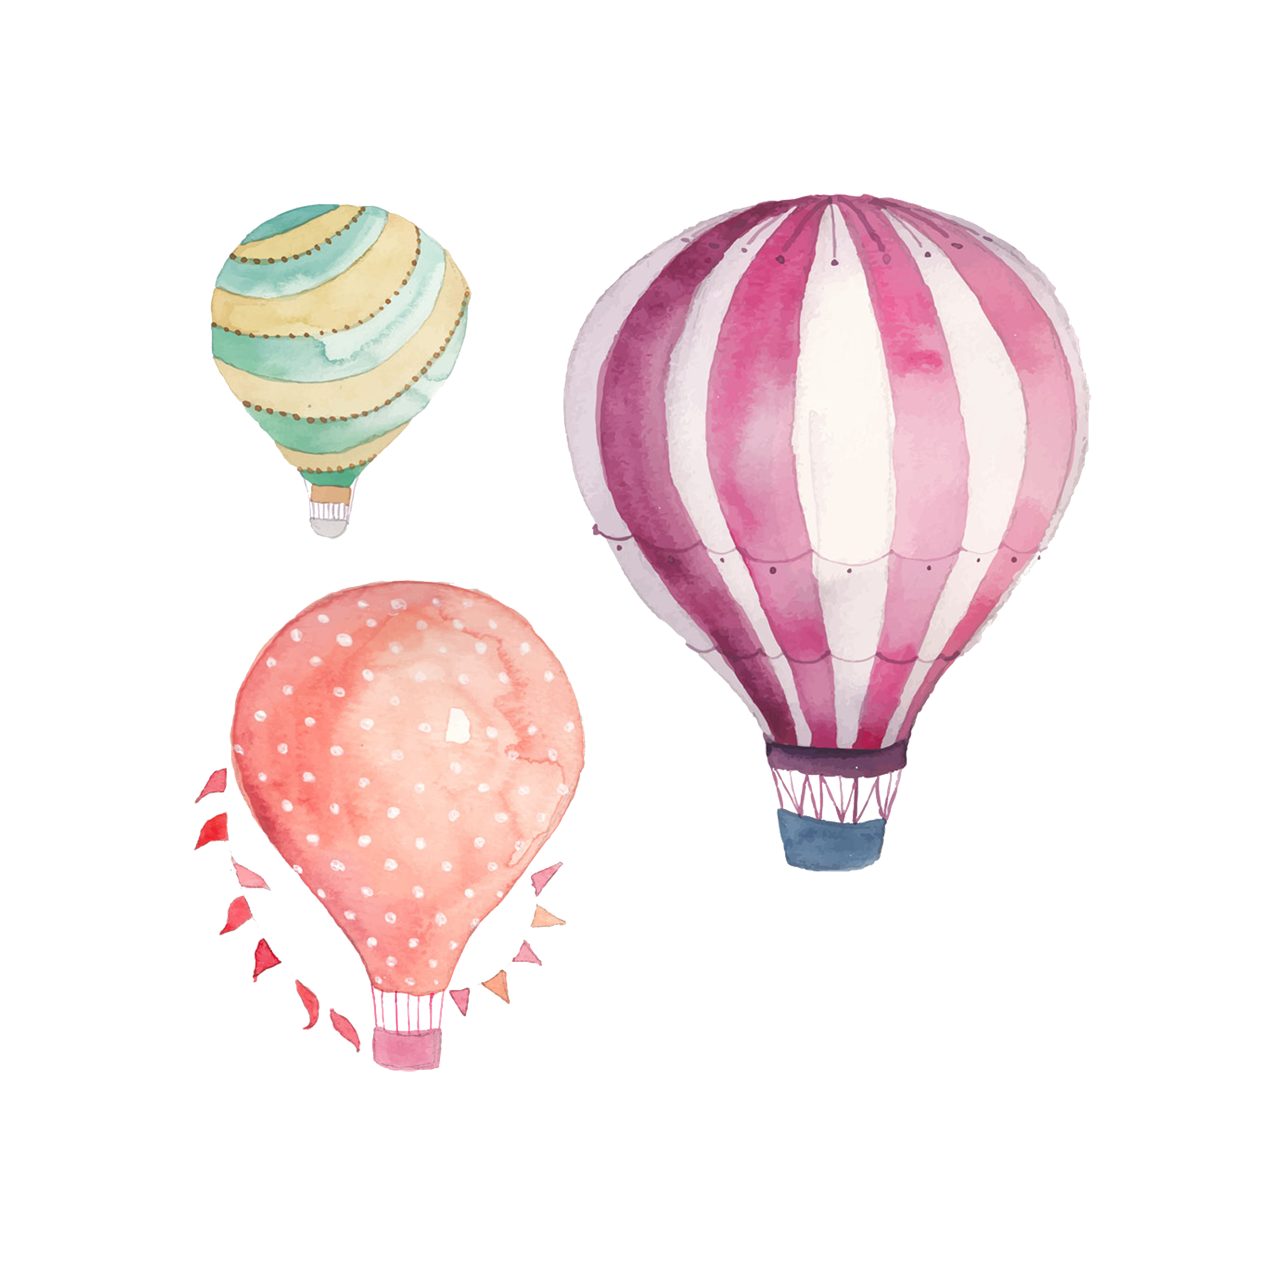 Balloon PNG Image with Transparent Background